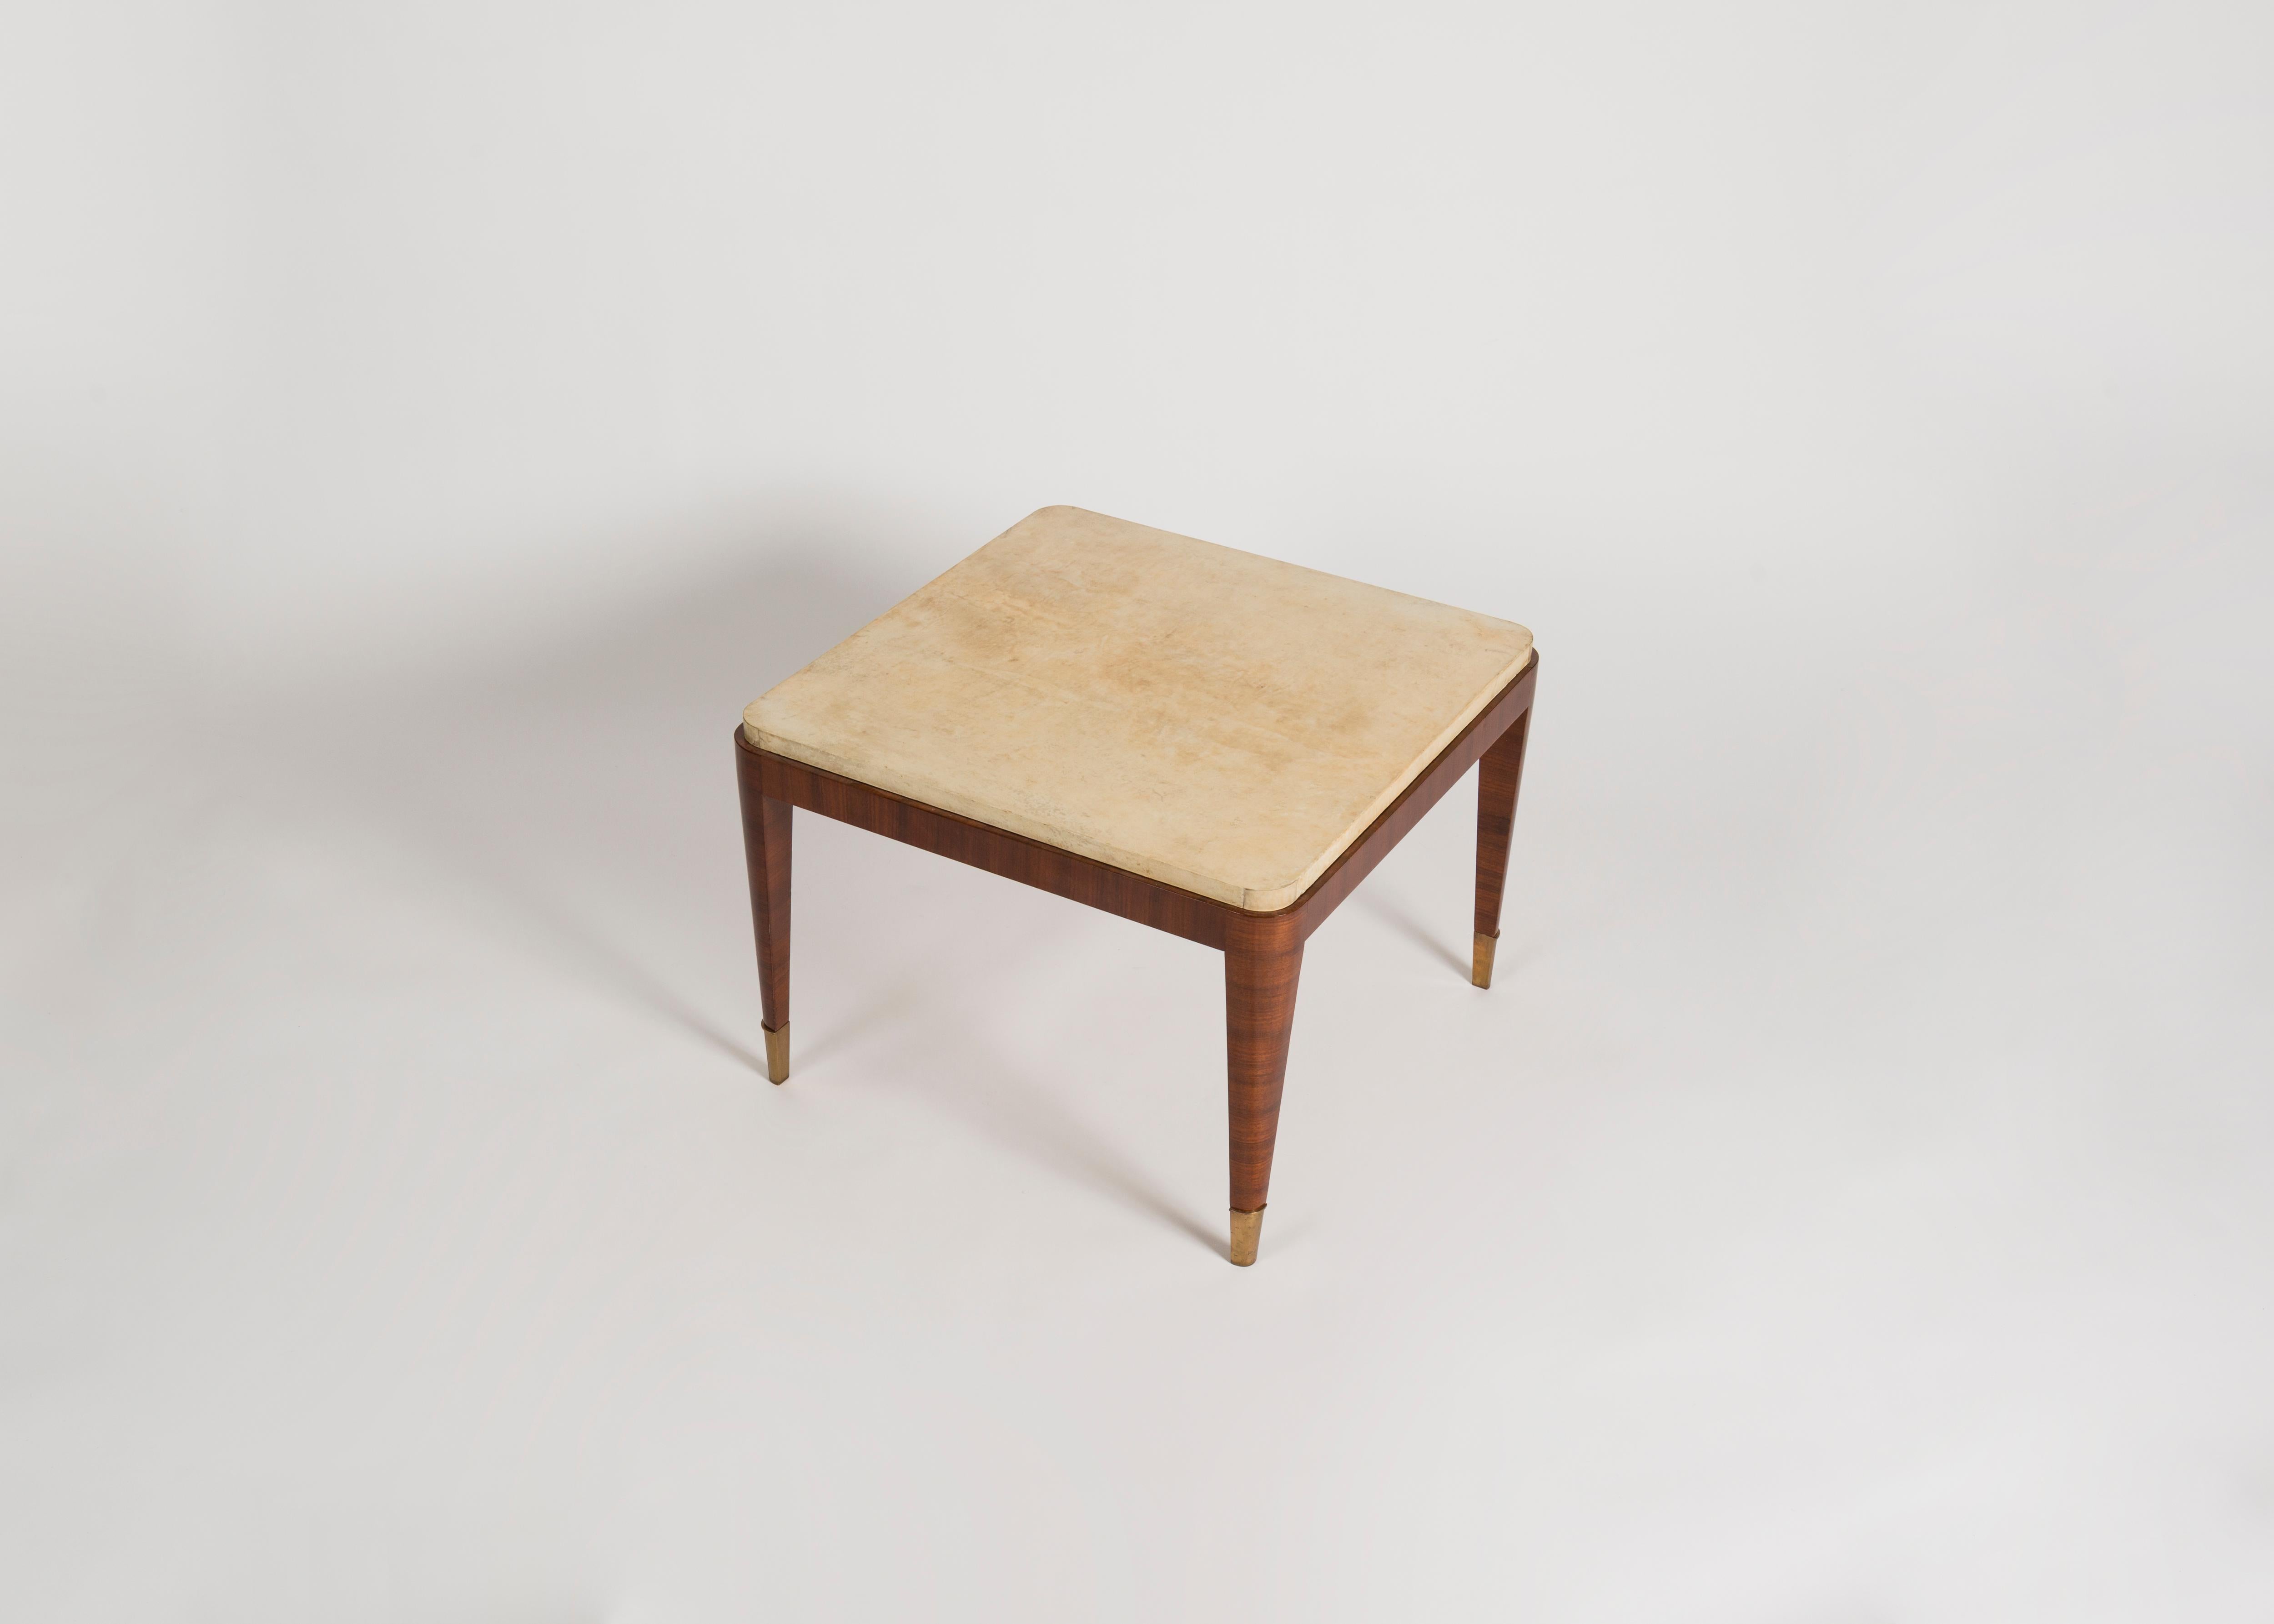 Gilt Art Deco Coffee Table in Parchment and Mahogany, France, circa 1940s